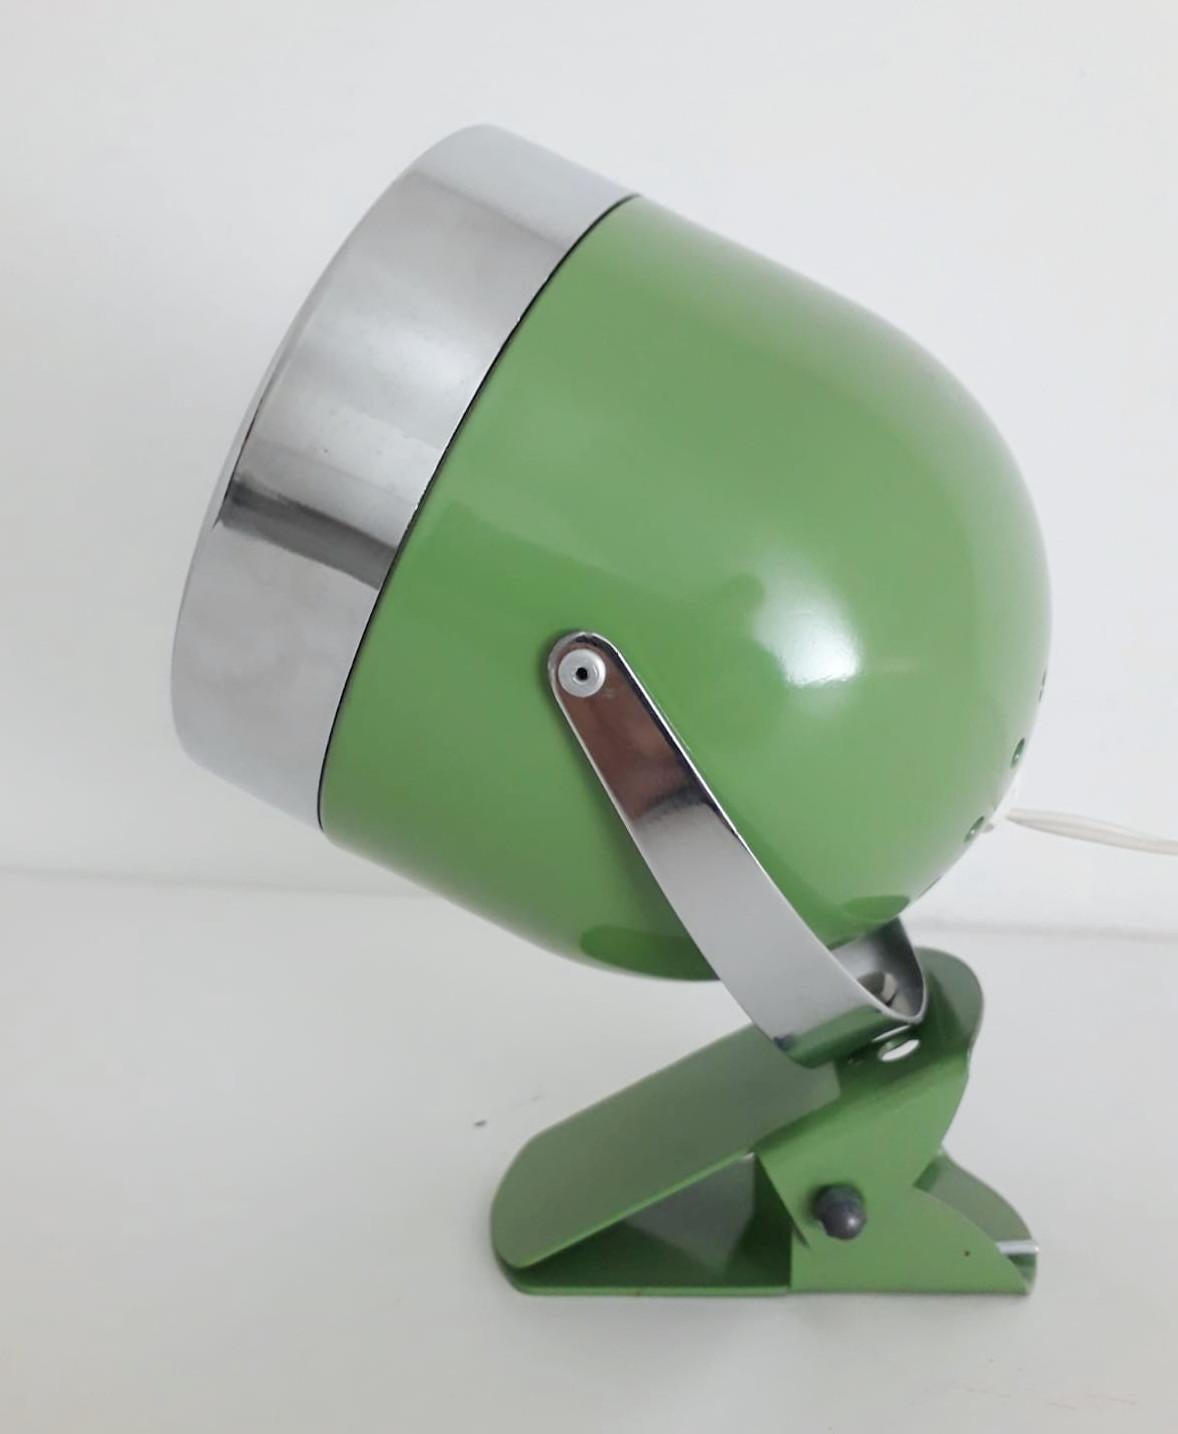 Vintage Italian adjustable spotlight with glossy green enameled body and chrome hardware, mounted with simple clip base, can be used as wall light or table lamp / Made in Italy circa 1970s
1 light / E14 type / max 40W
Measures: Height 7 inches /